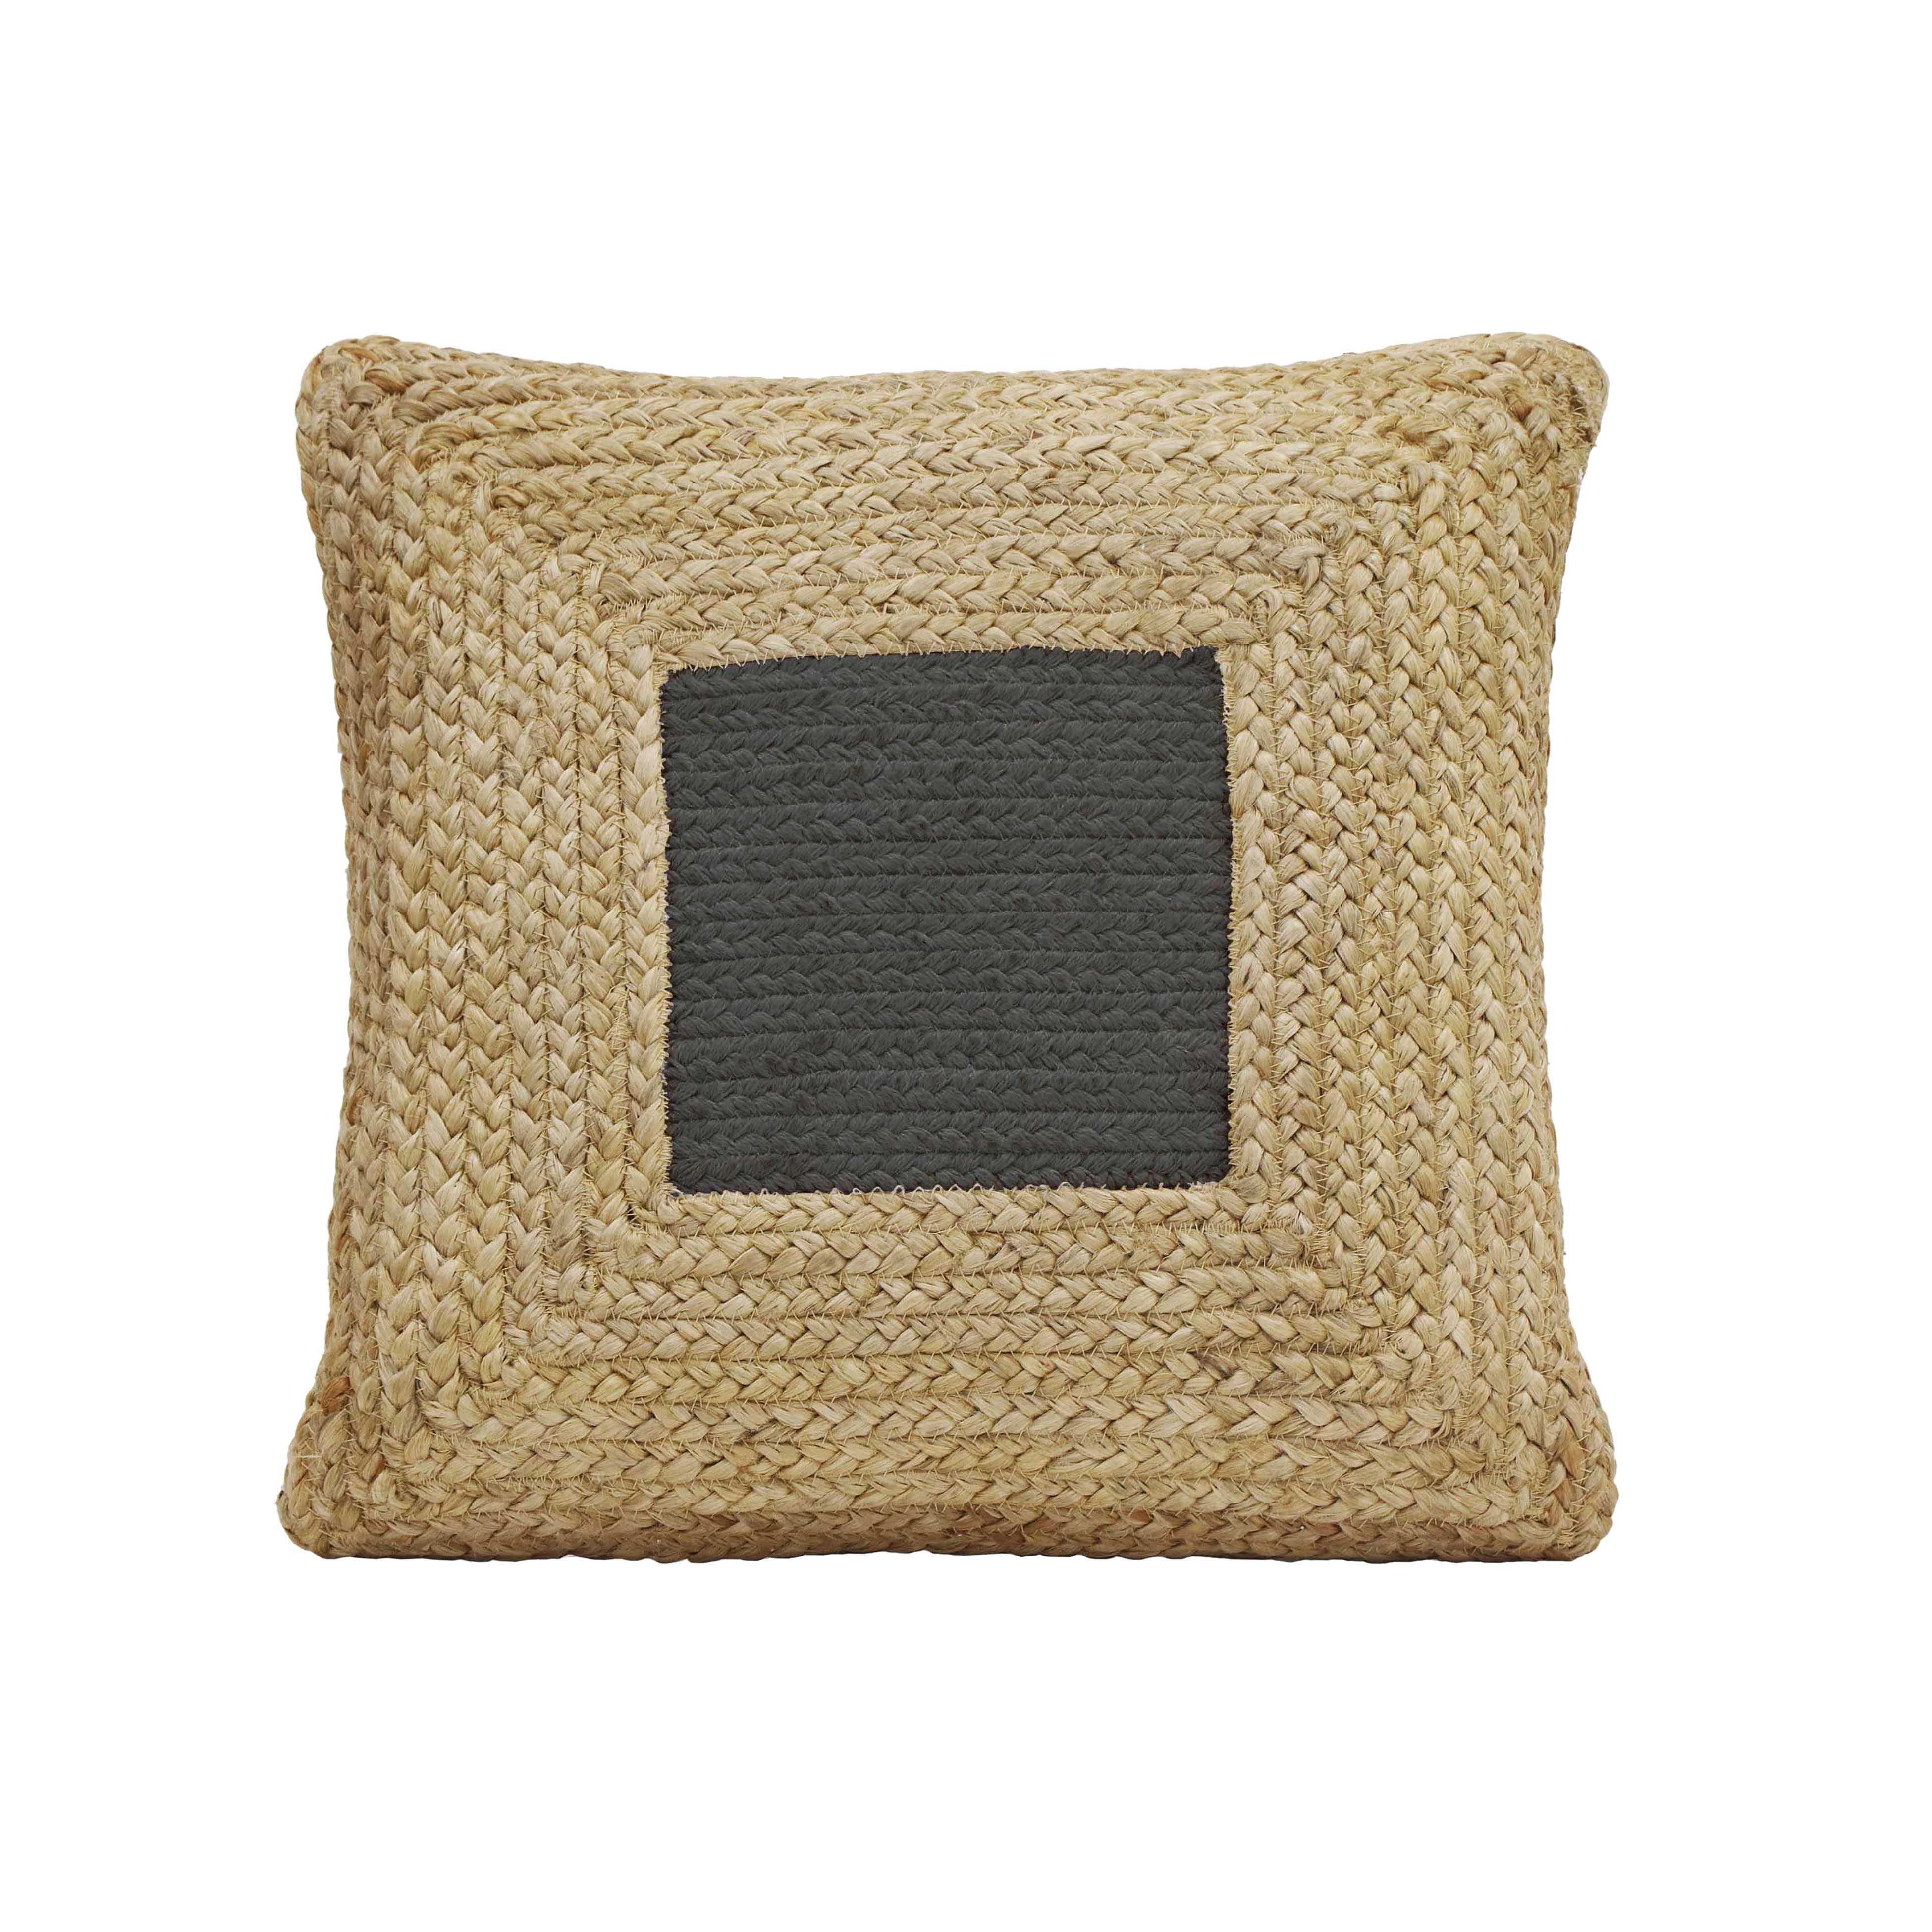 Tov Furniture Pillows - Blank Mind Black Square Accent Pillow